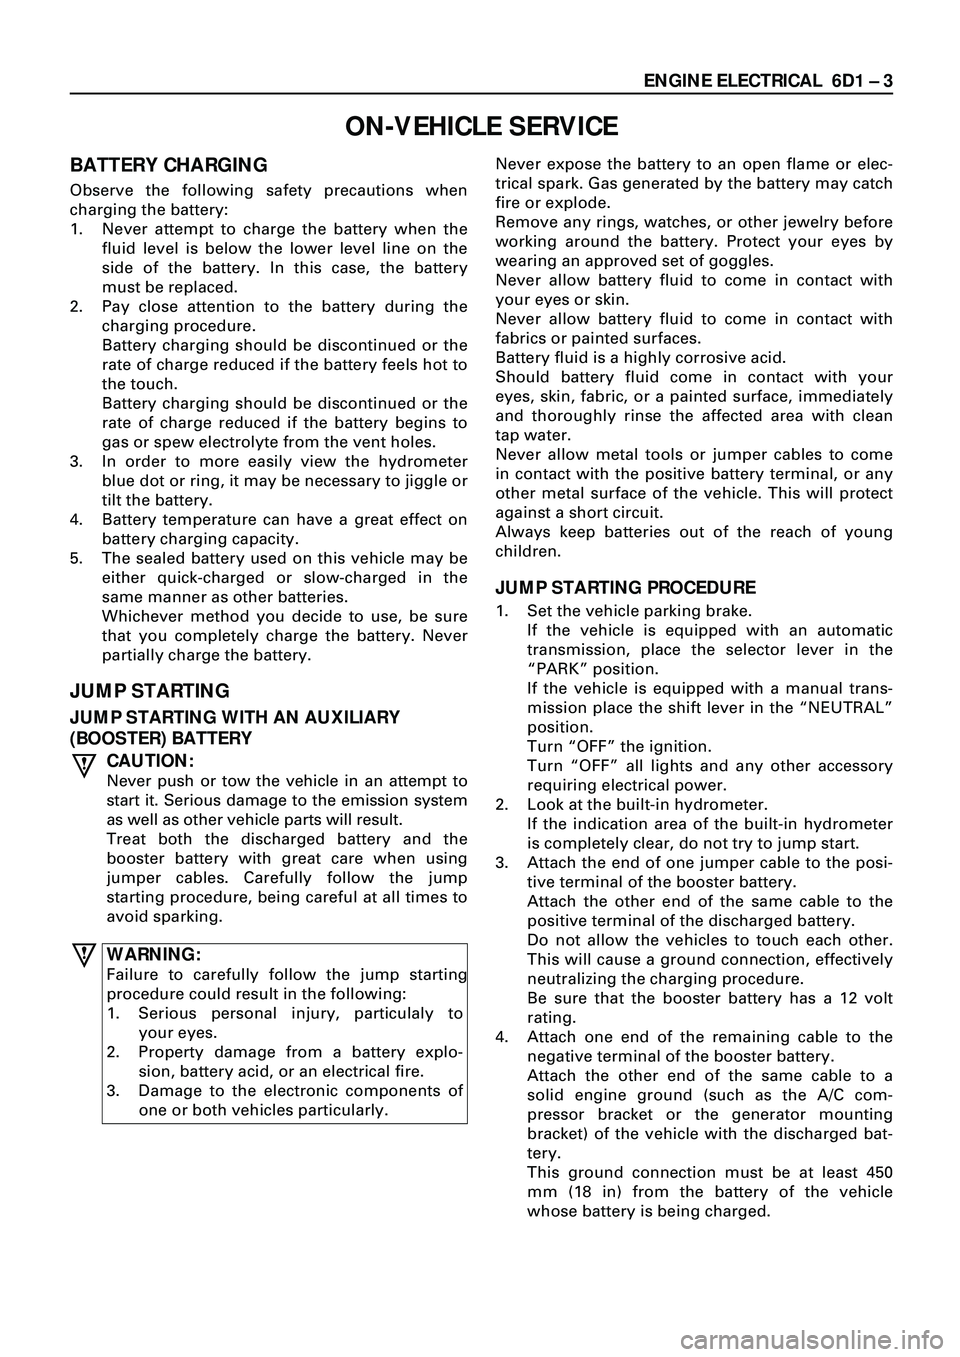 ISUZU TROOPER 1998  Service Workshop Manual ENGINE ELECTRICAL  6D1 Ð 3
BATTERY CHARGING
Observe the following safety precautions when
charging the battery:
1. Never attempt to charge the battery when the
fluid level is below the lower level li